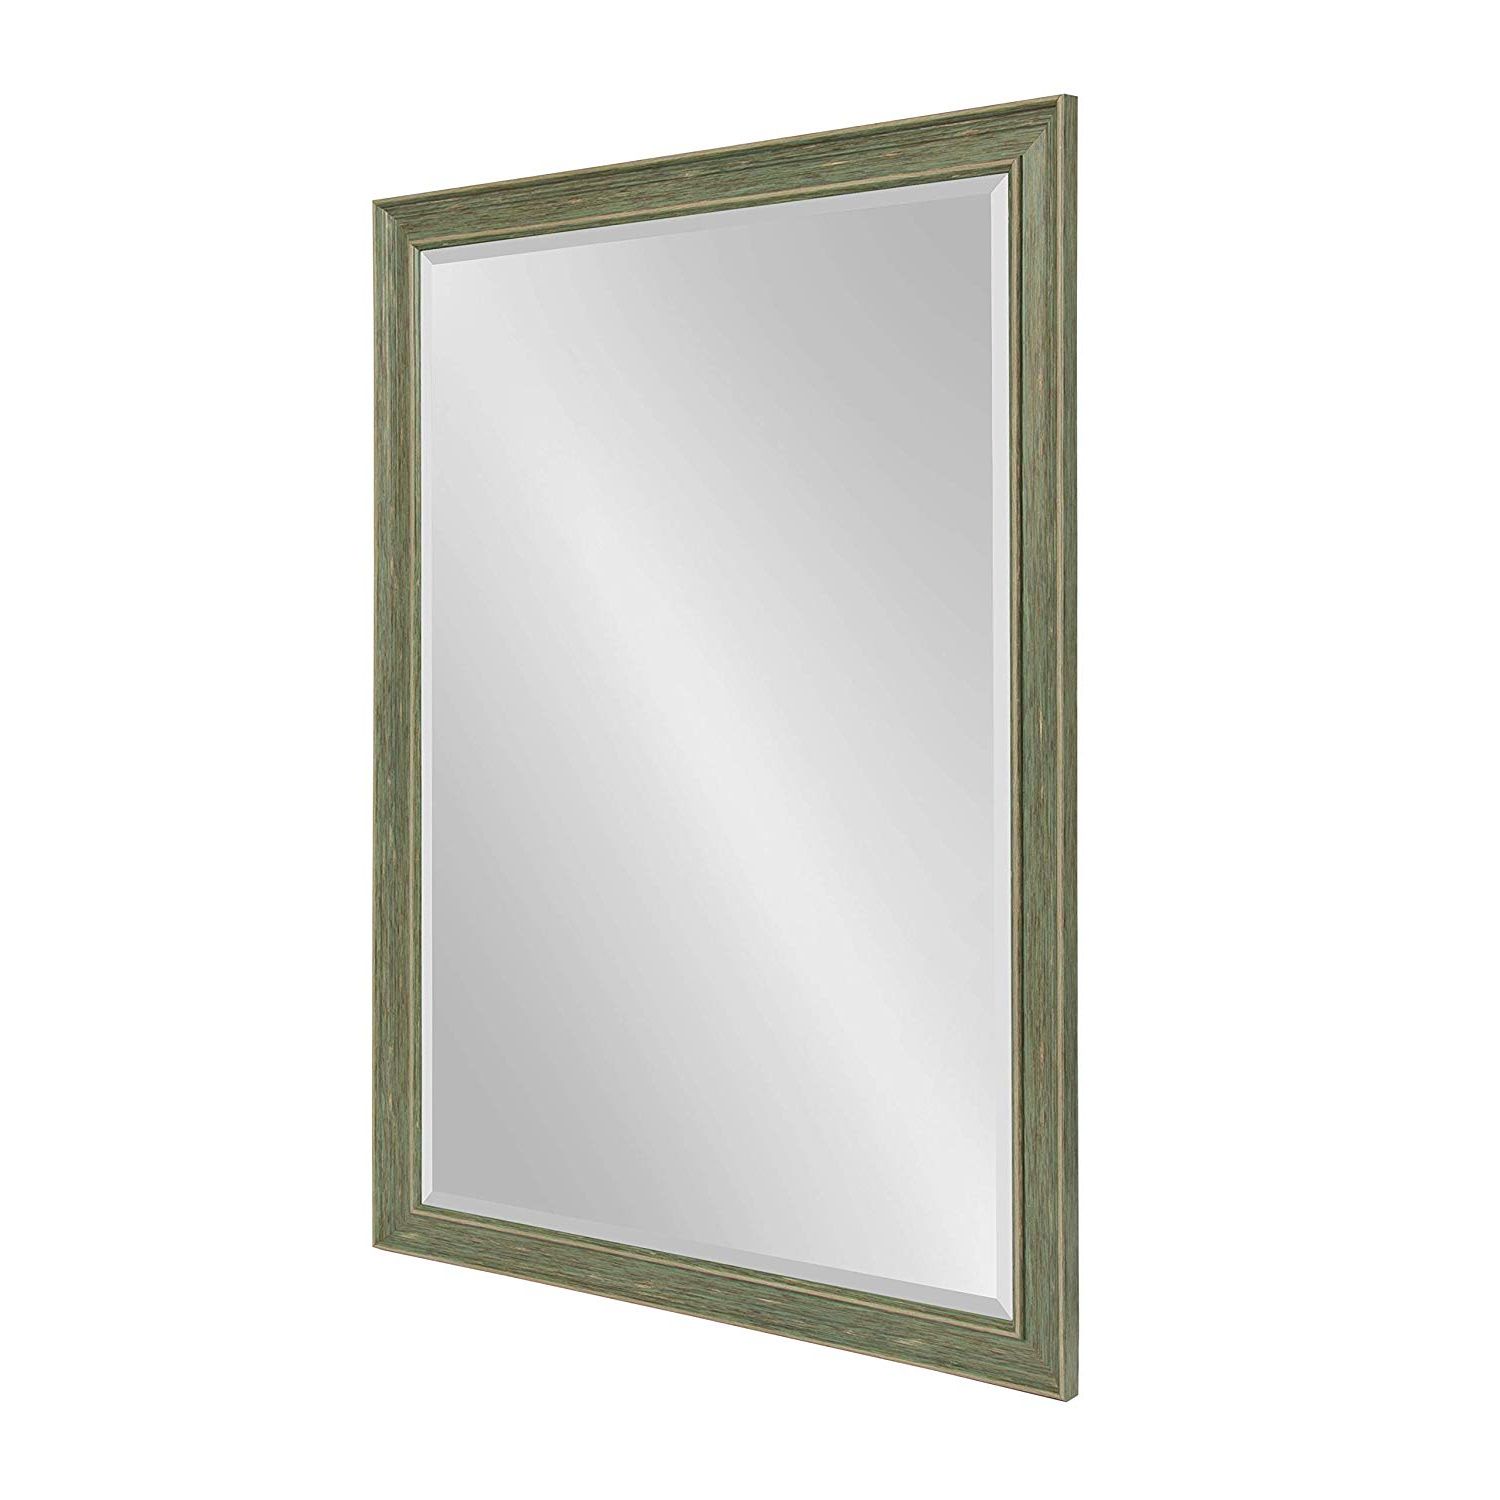 Decorative Framed Wall Mirrors Inside Preferred Amazon: Kate And Laurel Harvest Large Decorative Framed Wall (View 15 of 20)